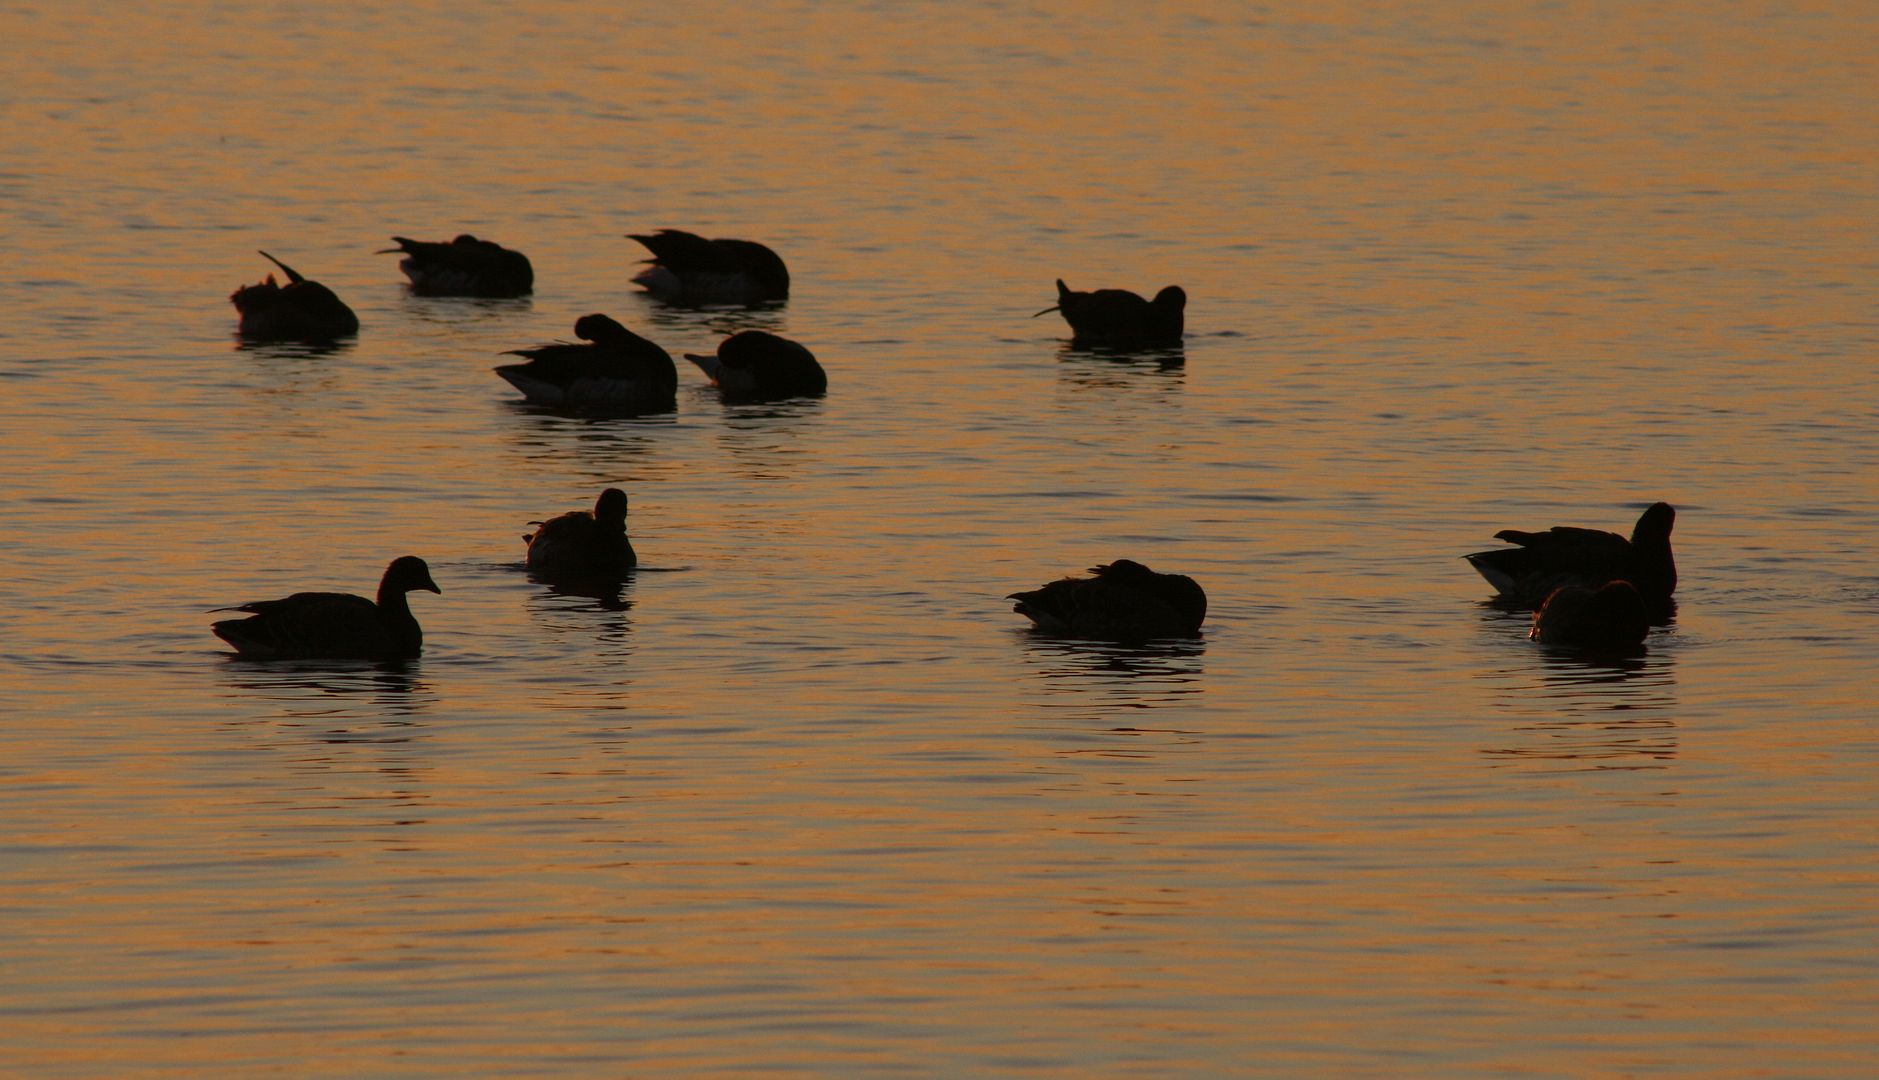 Brant%20on%20water%205_zps5tscwixv.jpg